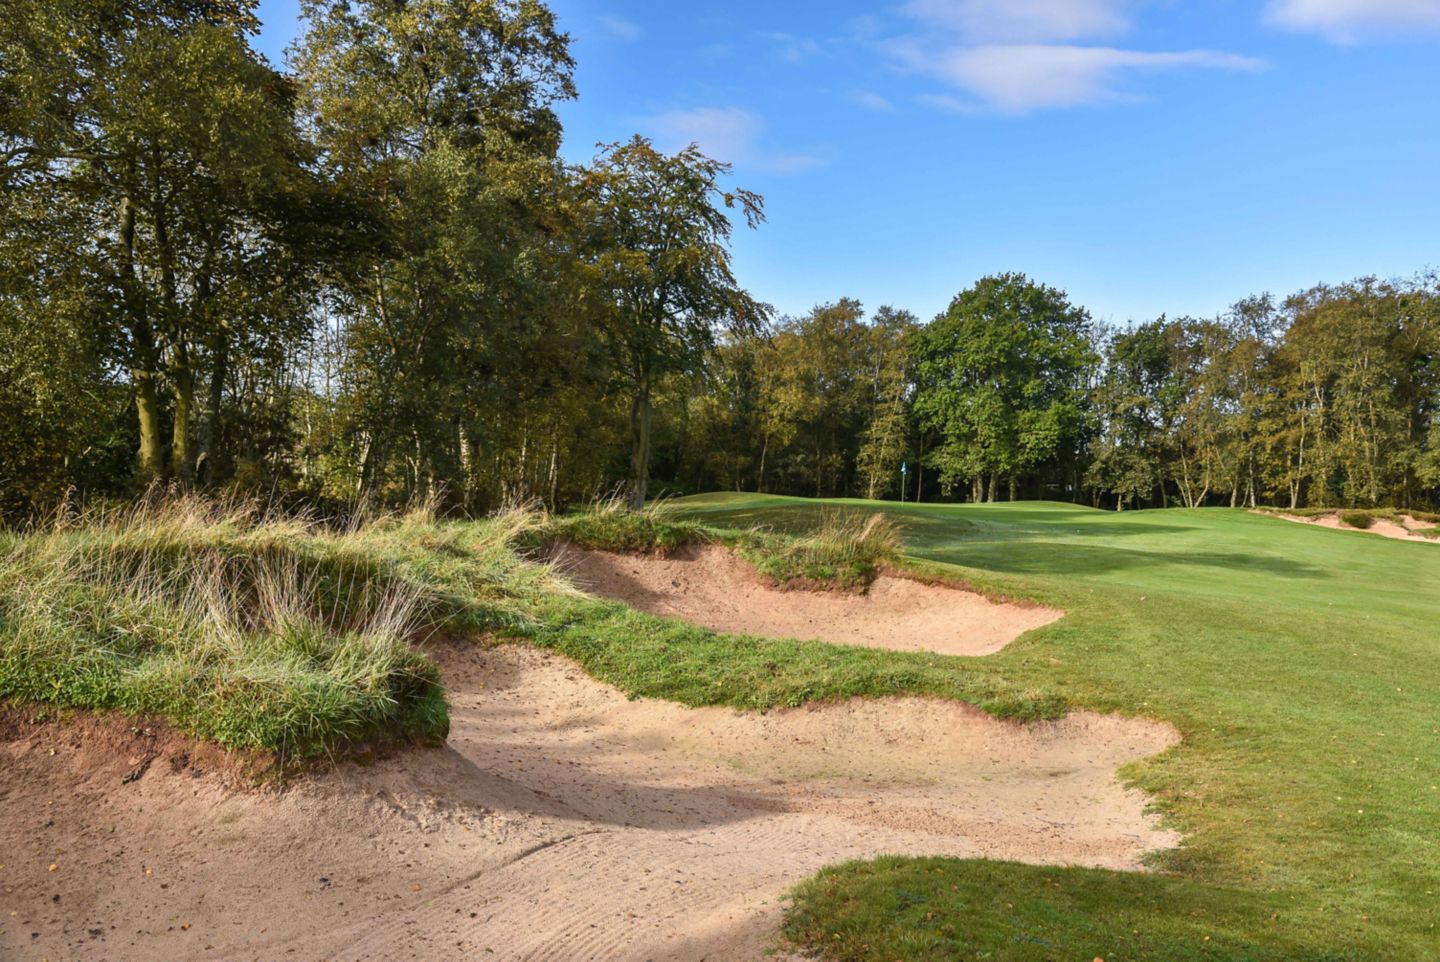 No. 2 Drumcarrow. Looking towards The Duke's 2nd hole green from the left of the fairway.